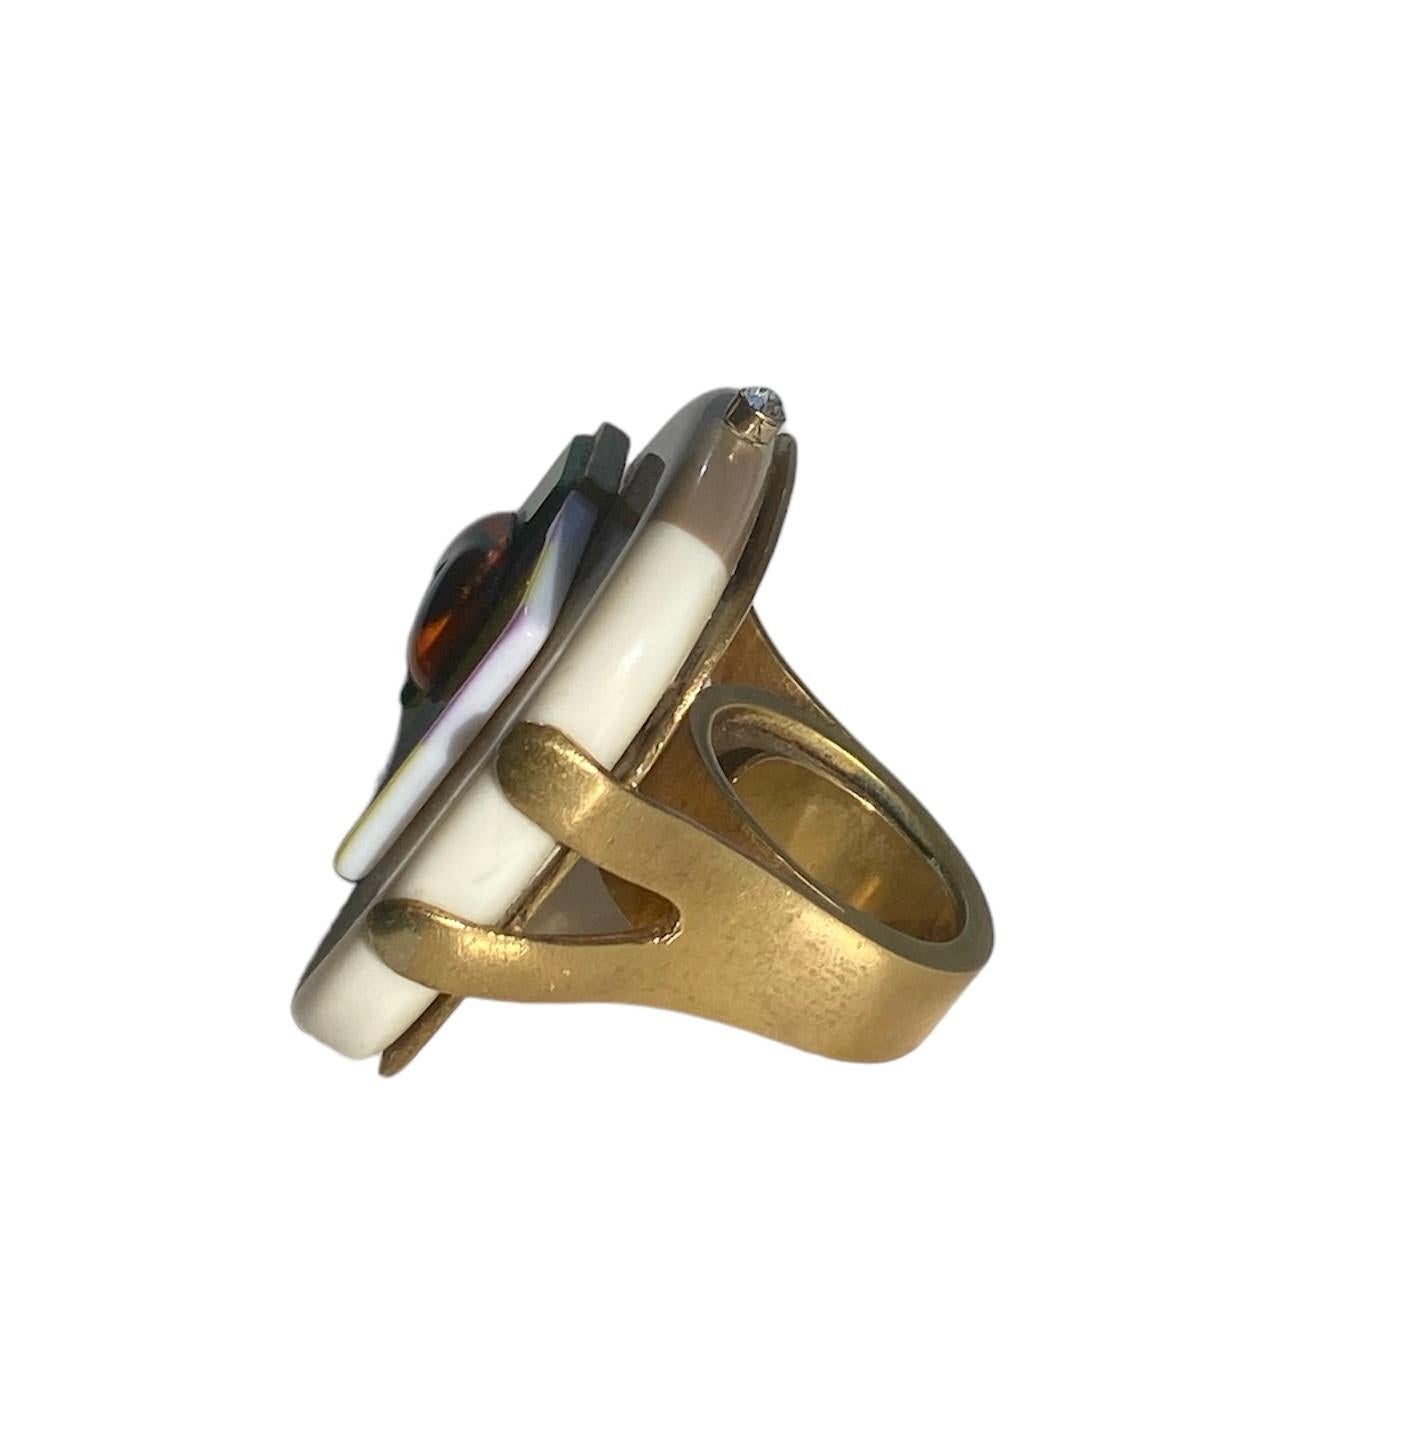 Baguette Cut One Off Ring. High Upcycling. Resin, Gold Plated Bronze & Vintage Elements. For Sale